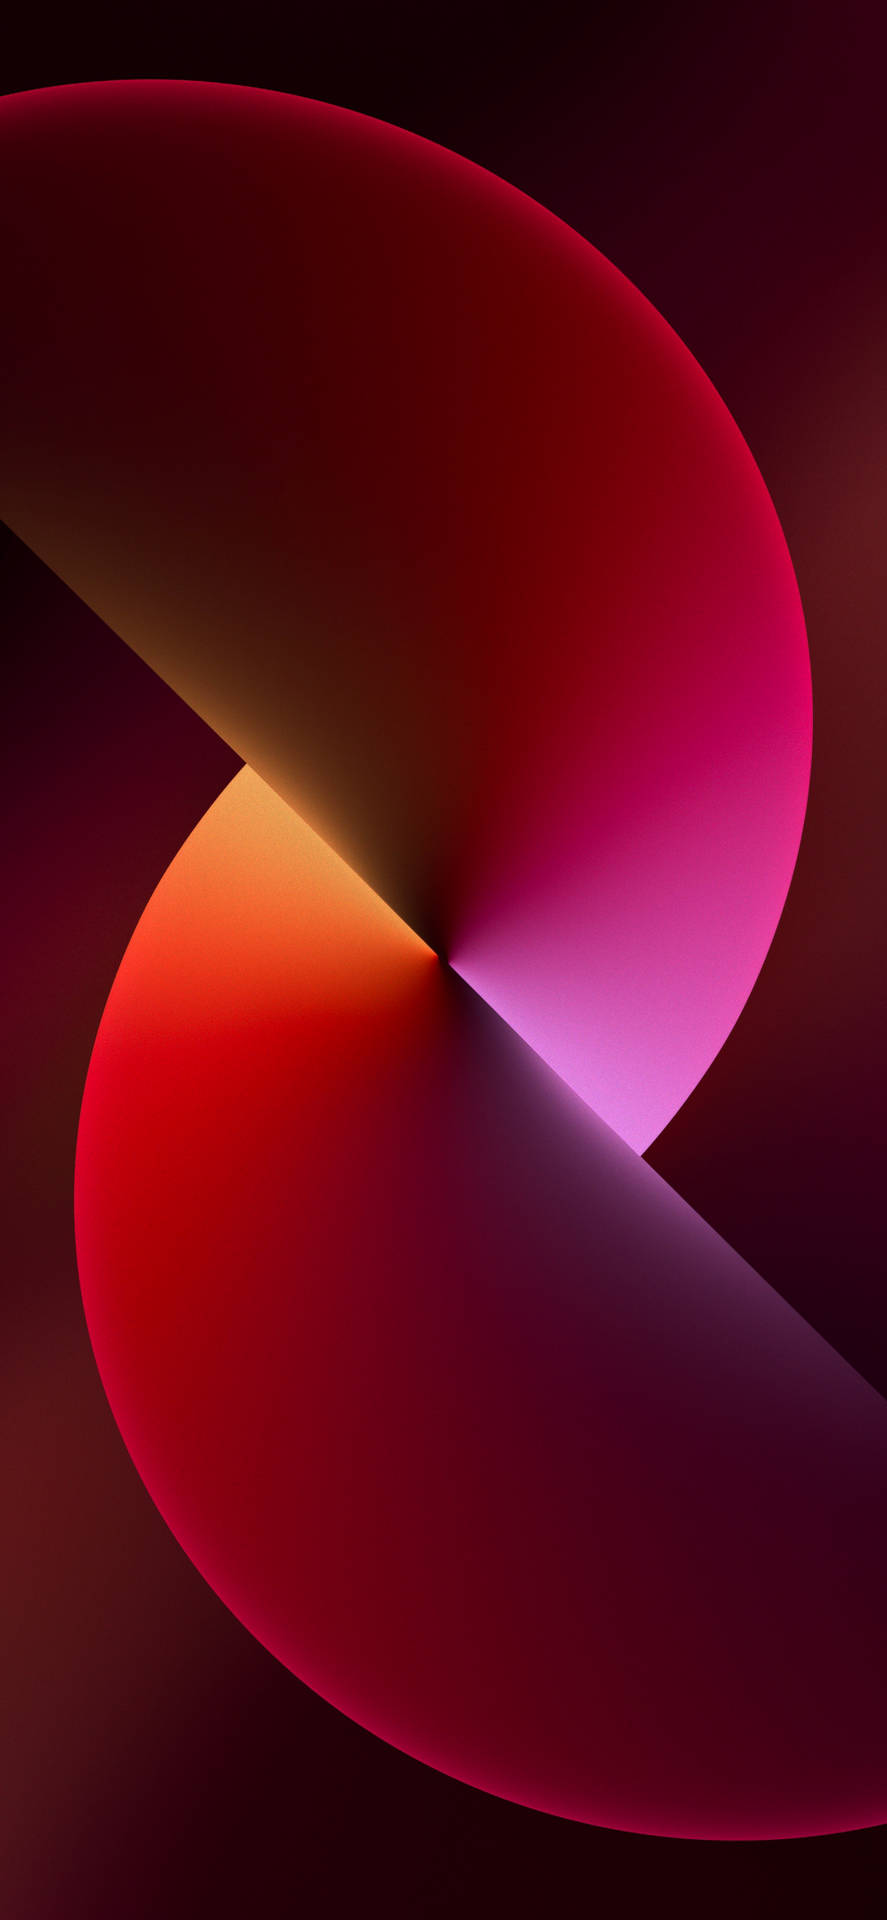 Fluid Gradient Geometric Black Red Background Wallpaper Image For Free  Download - Pngtree